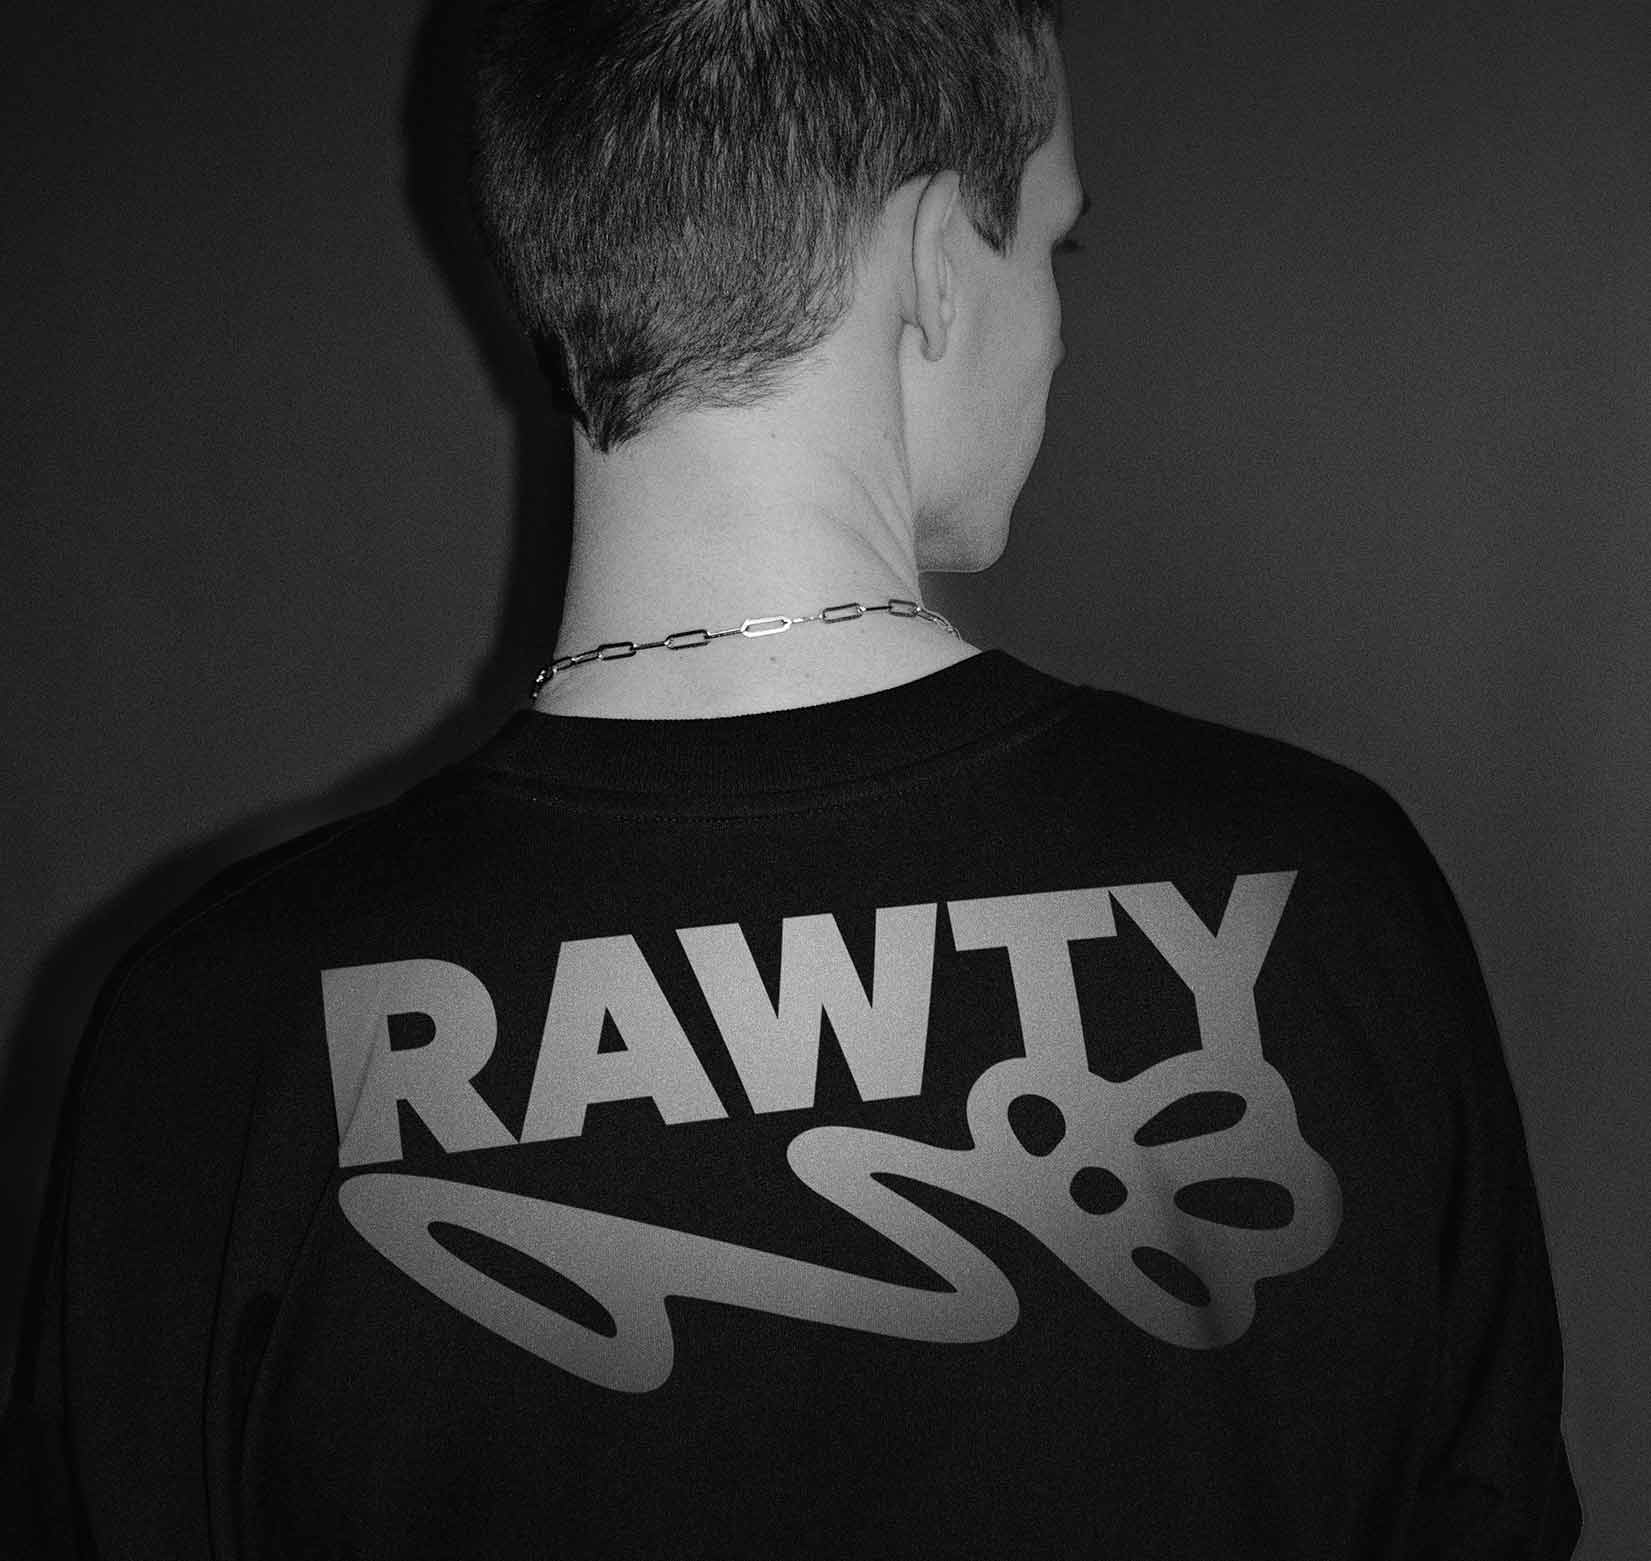 A black and white photo of person standing with the back to the camera wearing a black t-shirt with the white RAWTY logo.